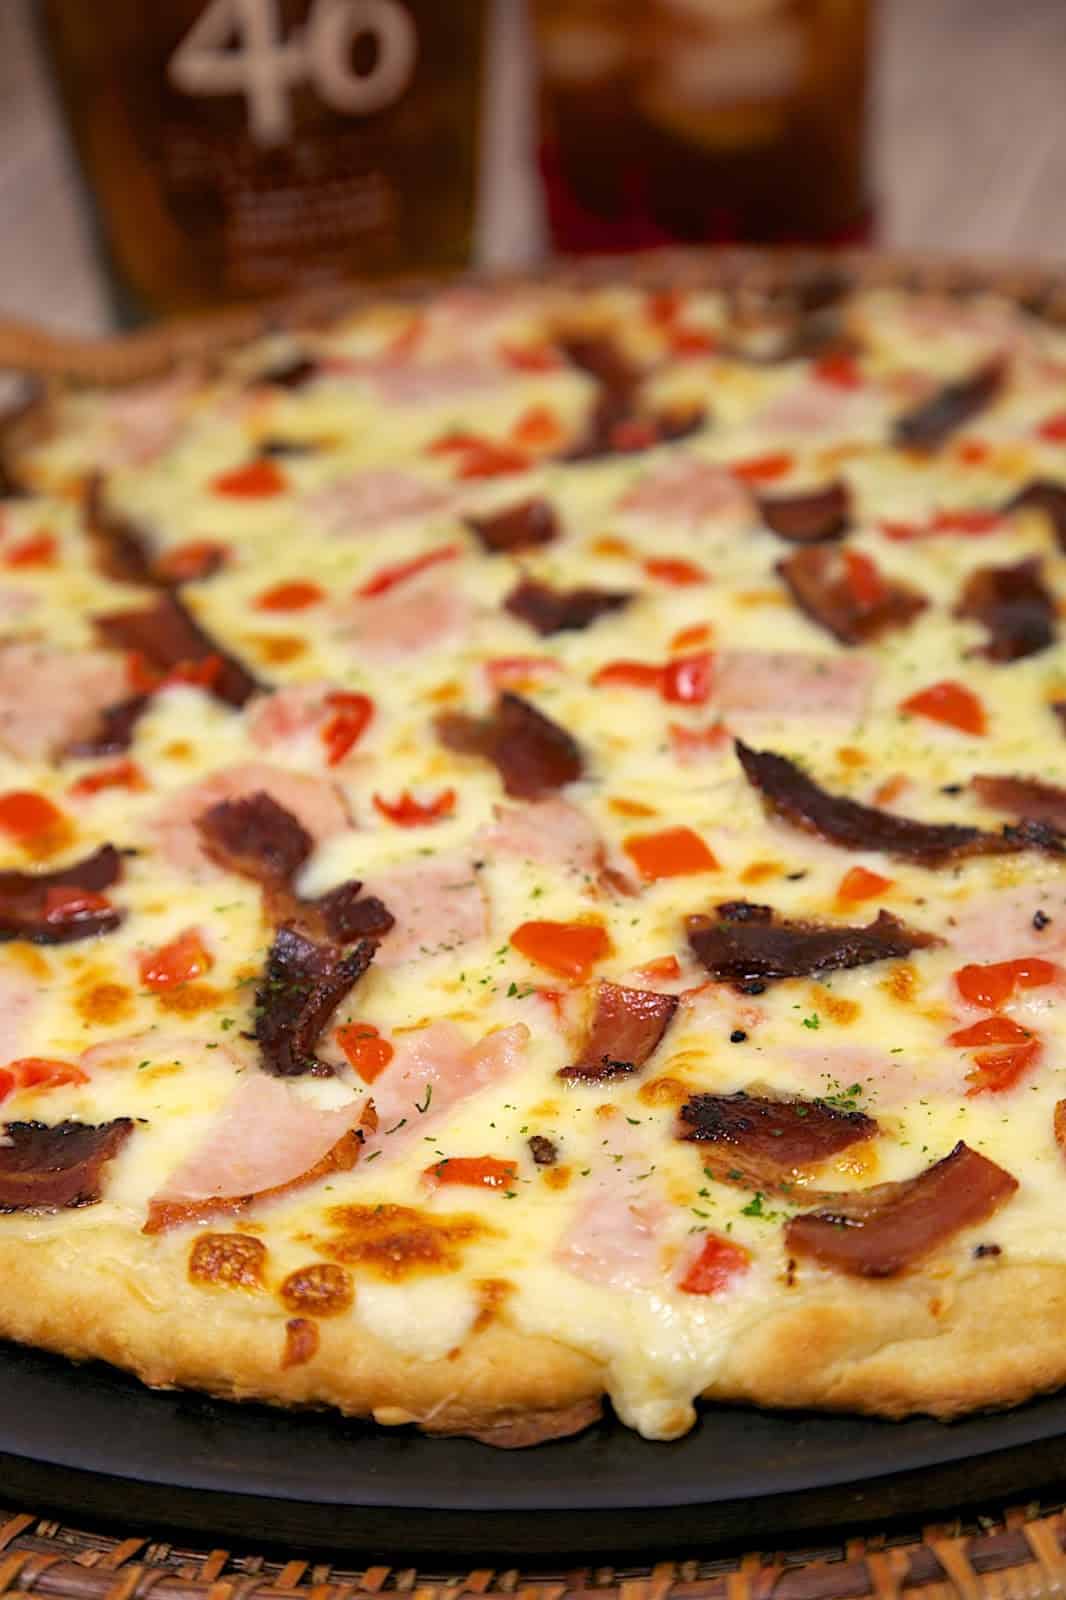 Hot Brown Pizza Recipe - mornay sauce(swiss cheese sauce), turkey, tomatoes, bacon, swiss and mozzarella cheese - perfect for watching the Kentucky Derby!